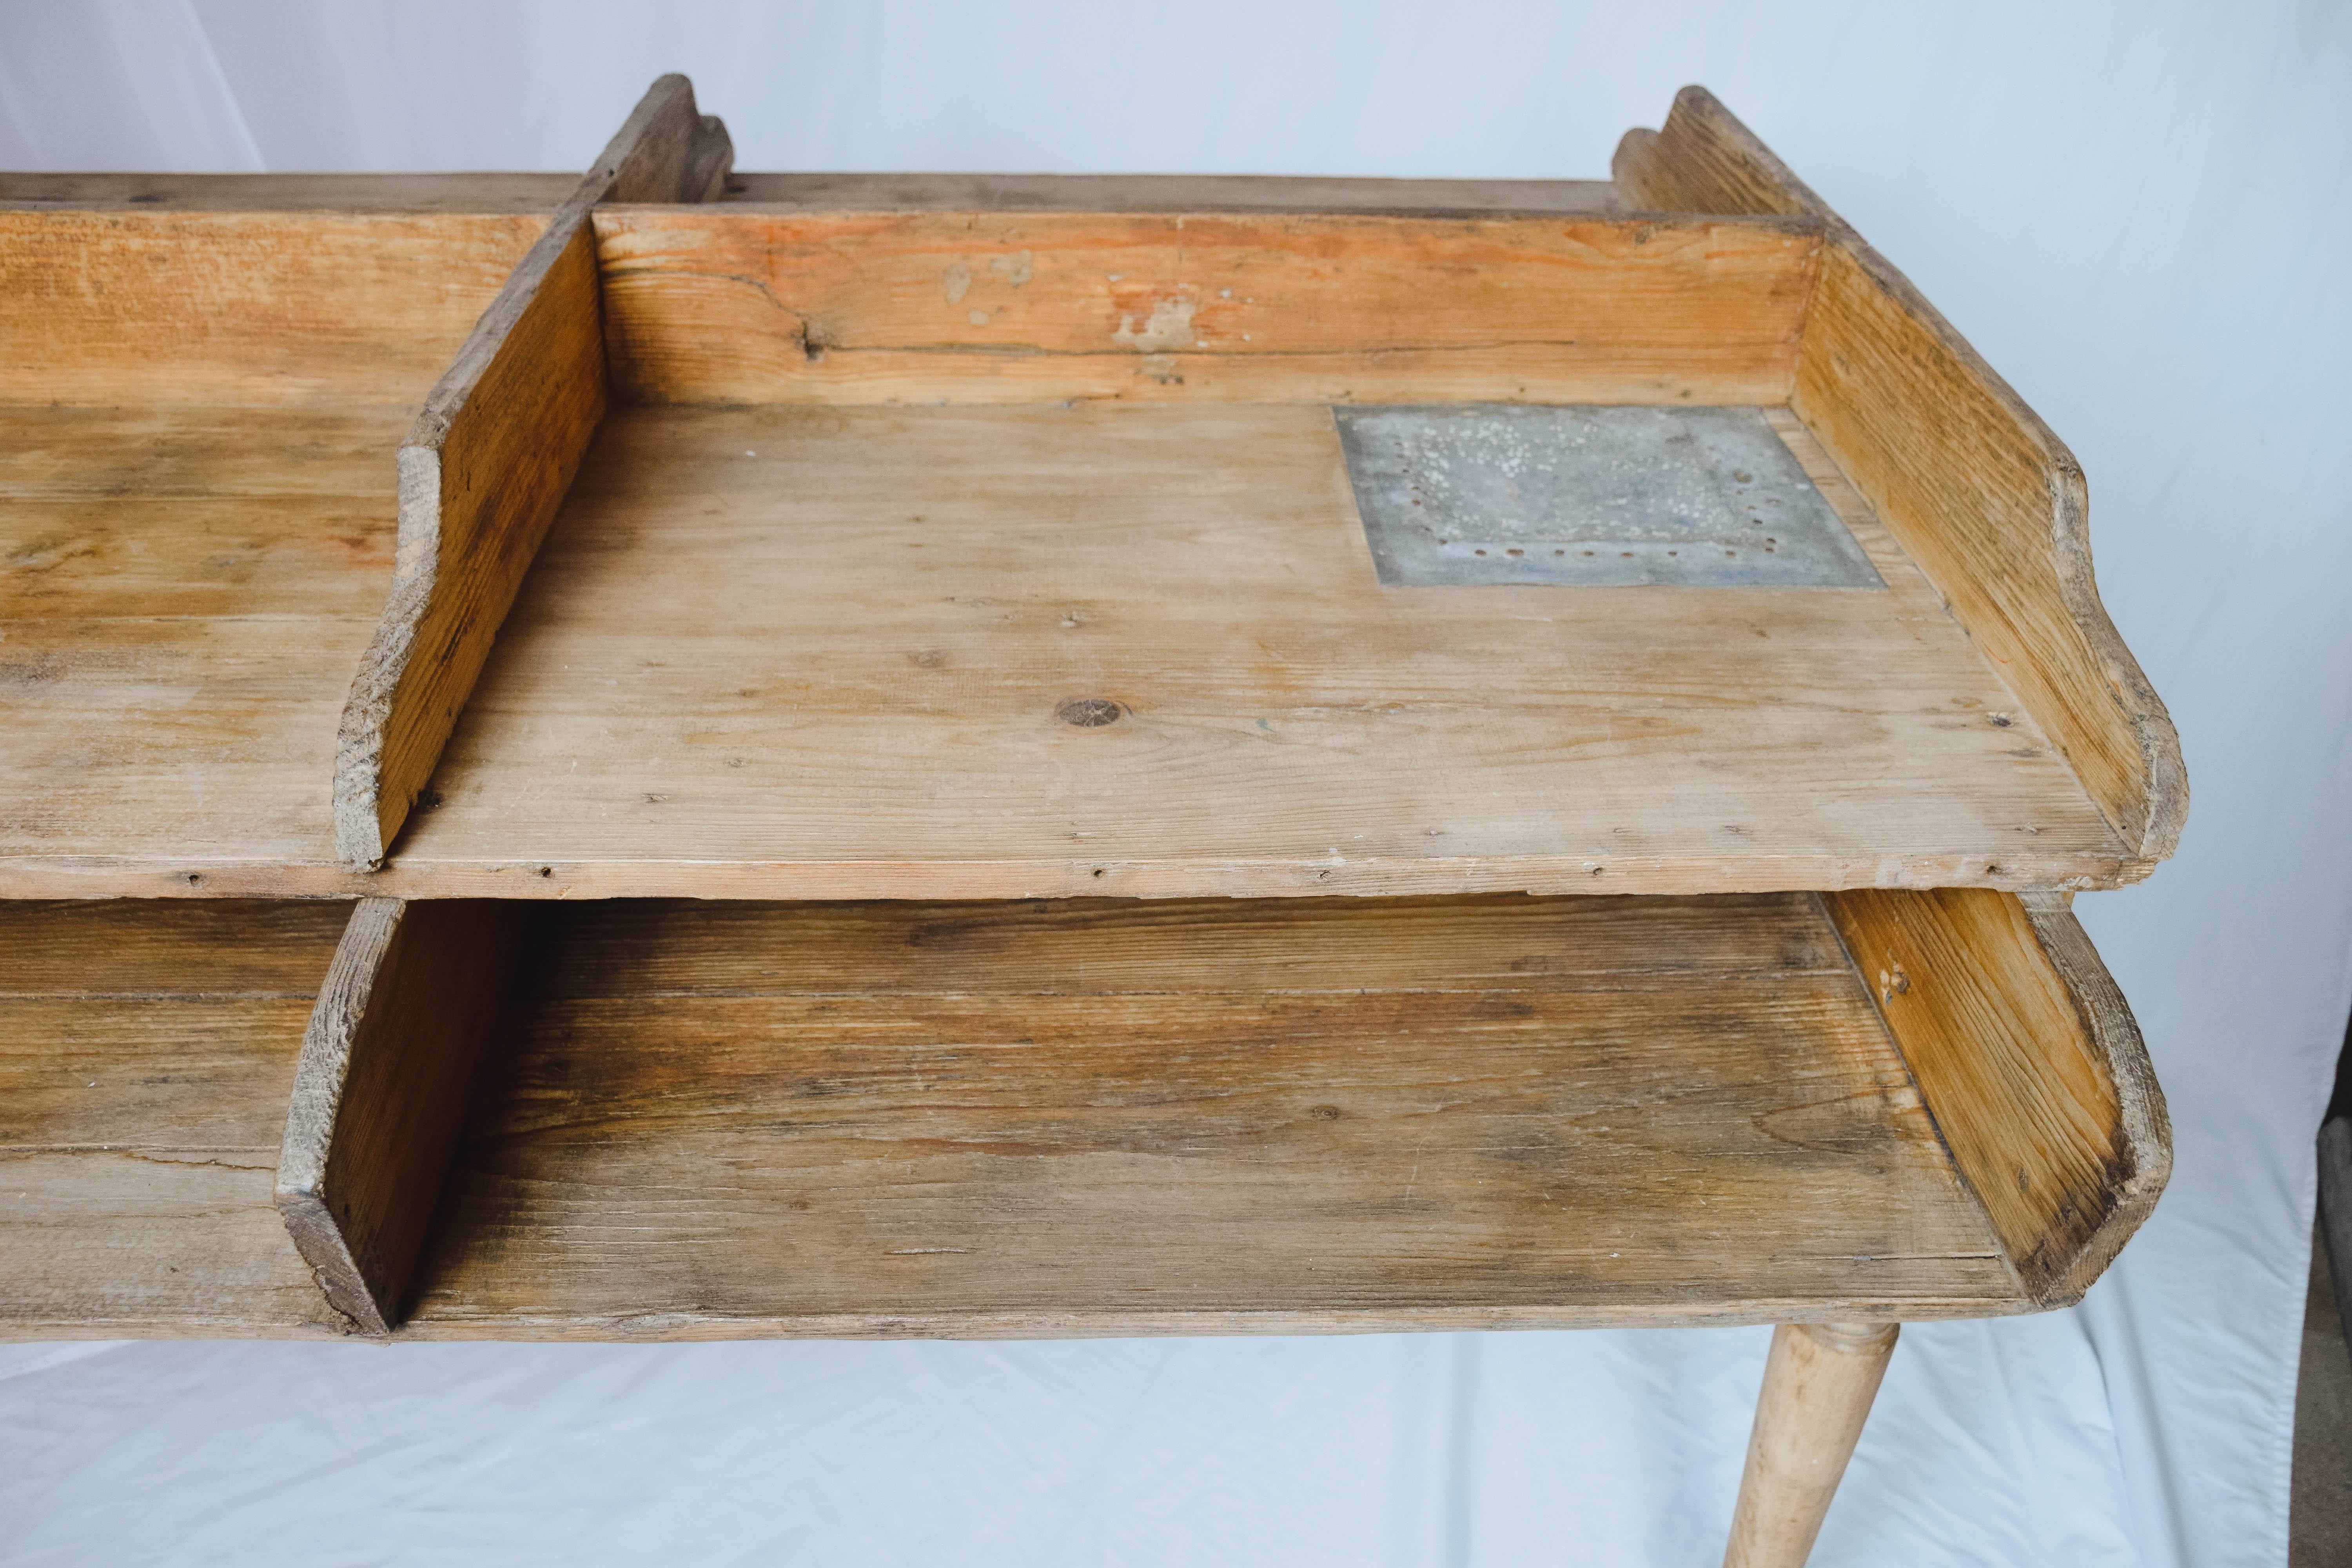 This Six Bin Cigar factory table was used to hand roll cigars in a German factory. Cuban cigars were very popular in Germany, who had strong business ties with Cuba. In Germany, the habano-type Cuban cigars had a very good market and In the late